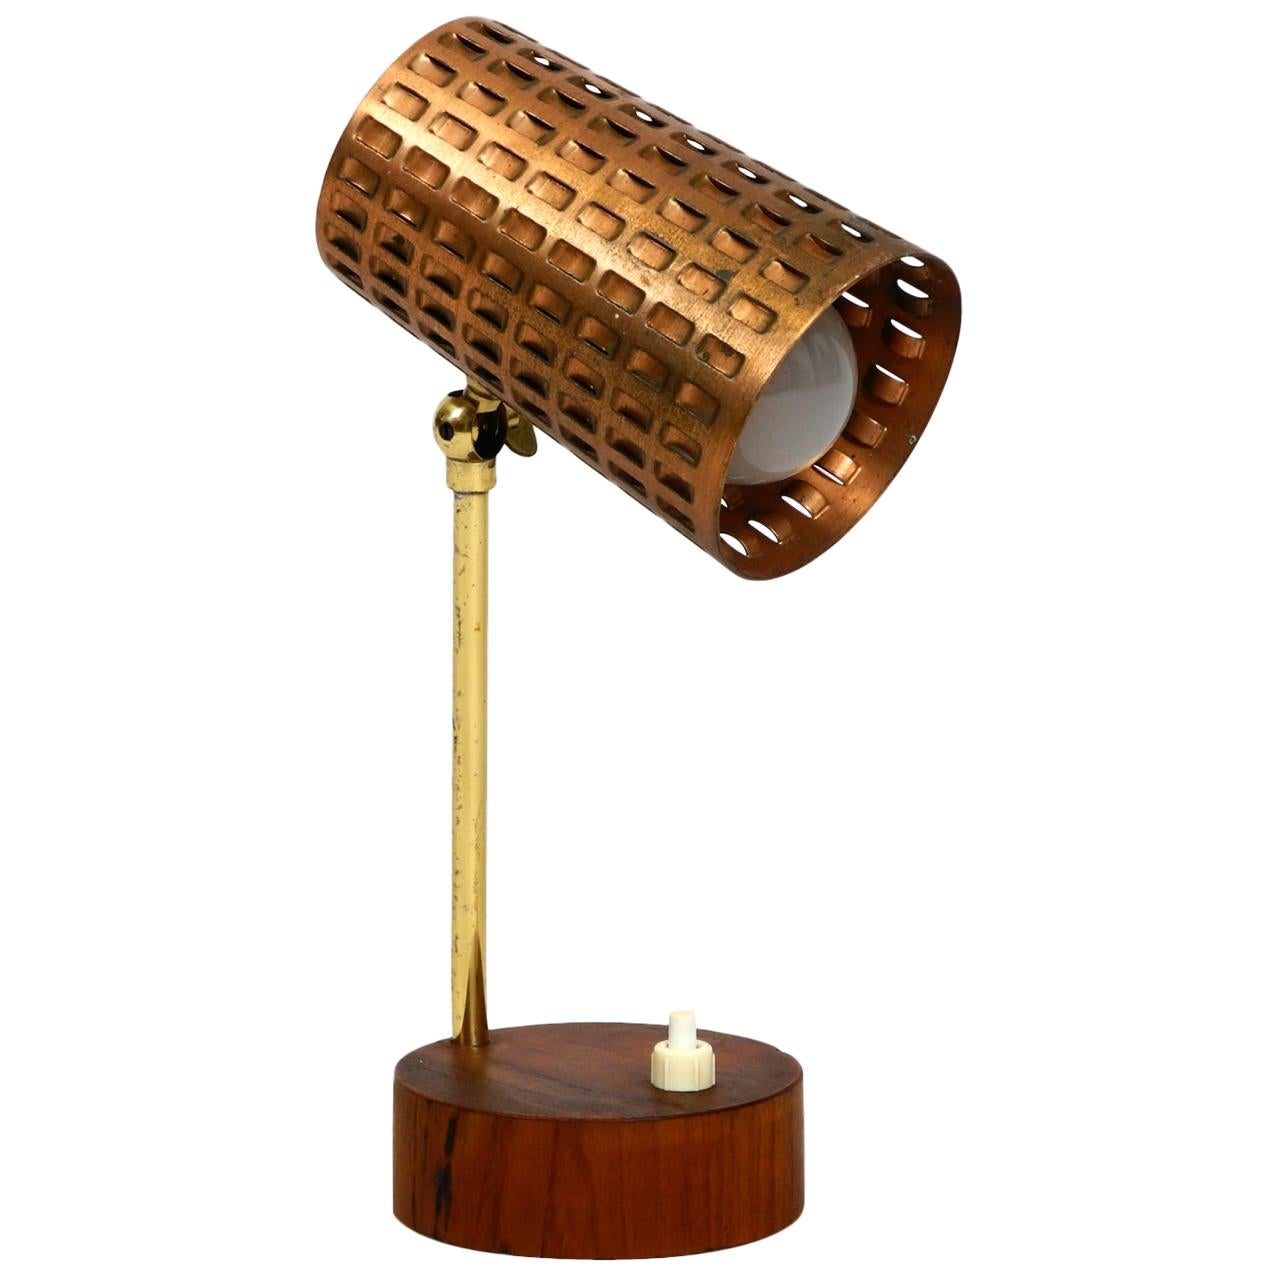 Beautiful Midcentury Table Lamp with Perforated Copper Shade and Teak Wood Base